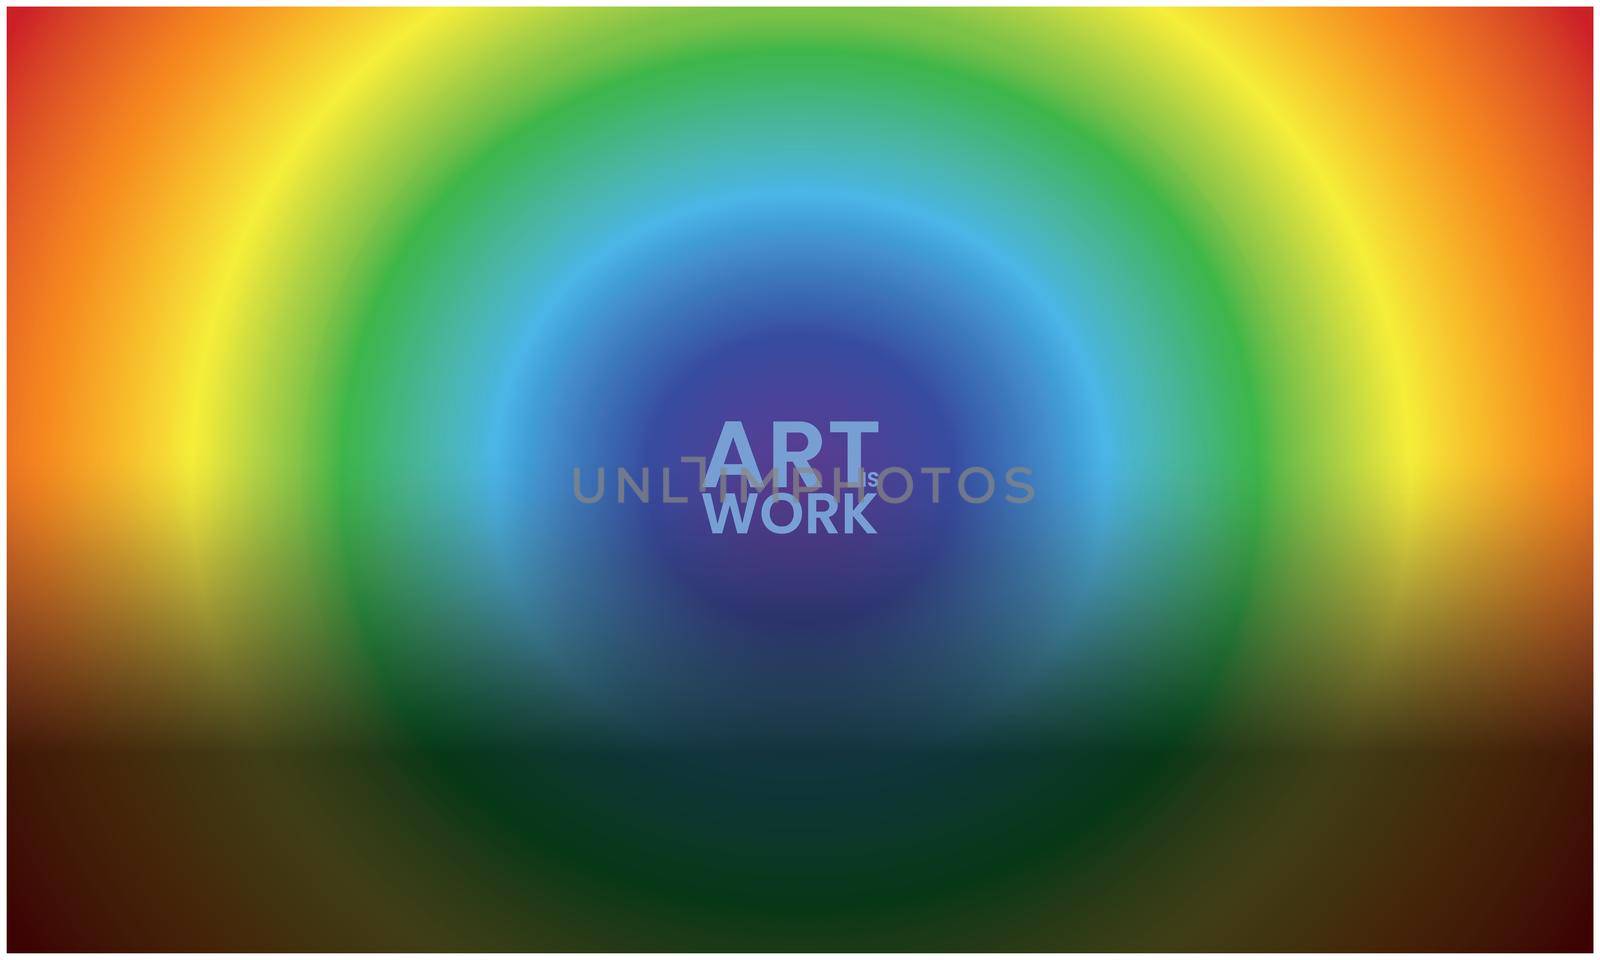 art is work text on abstract rainbow background